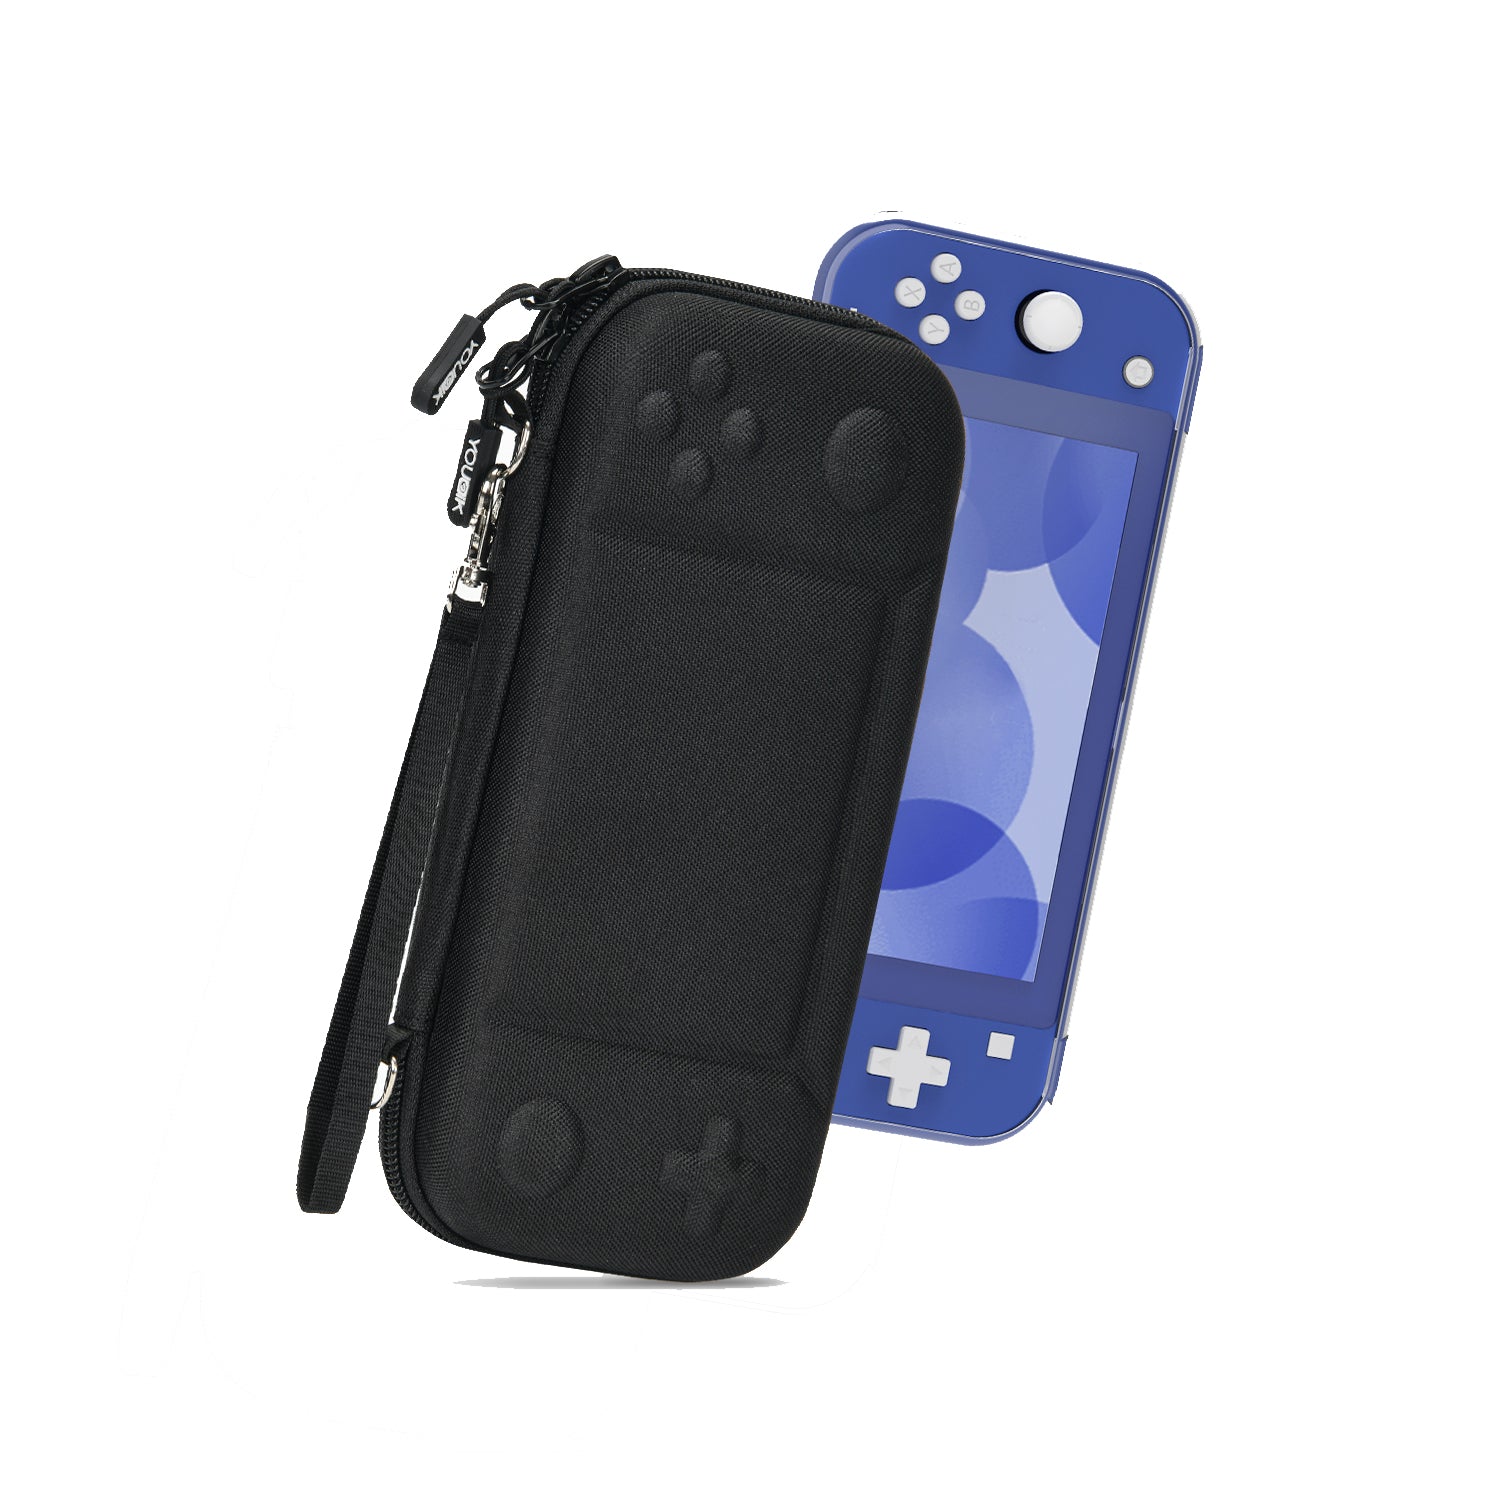 Younik Switch Lite Carry Case, Protective Case for Nintendo Switch Lite